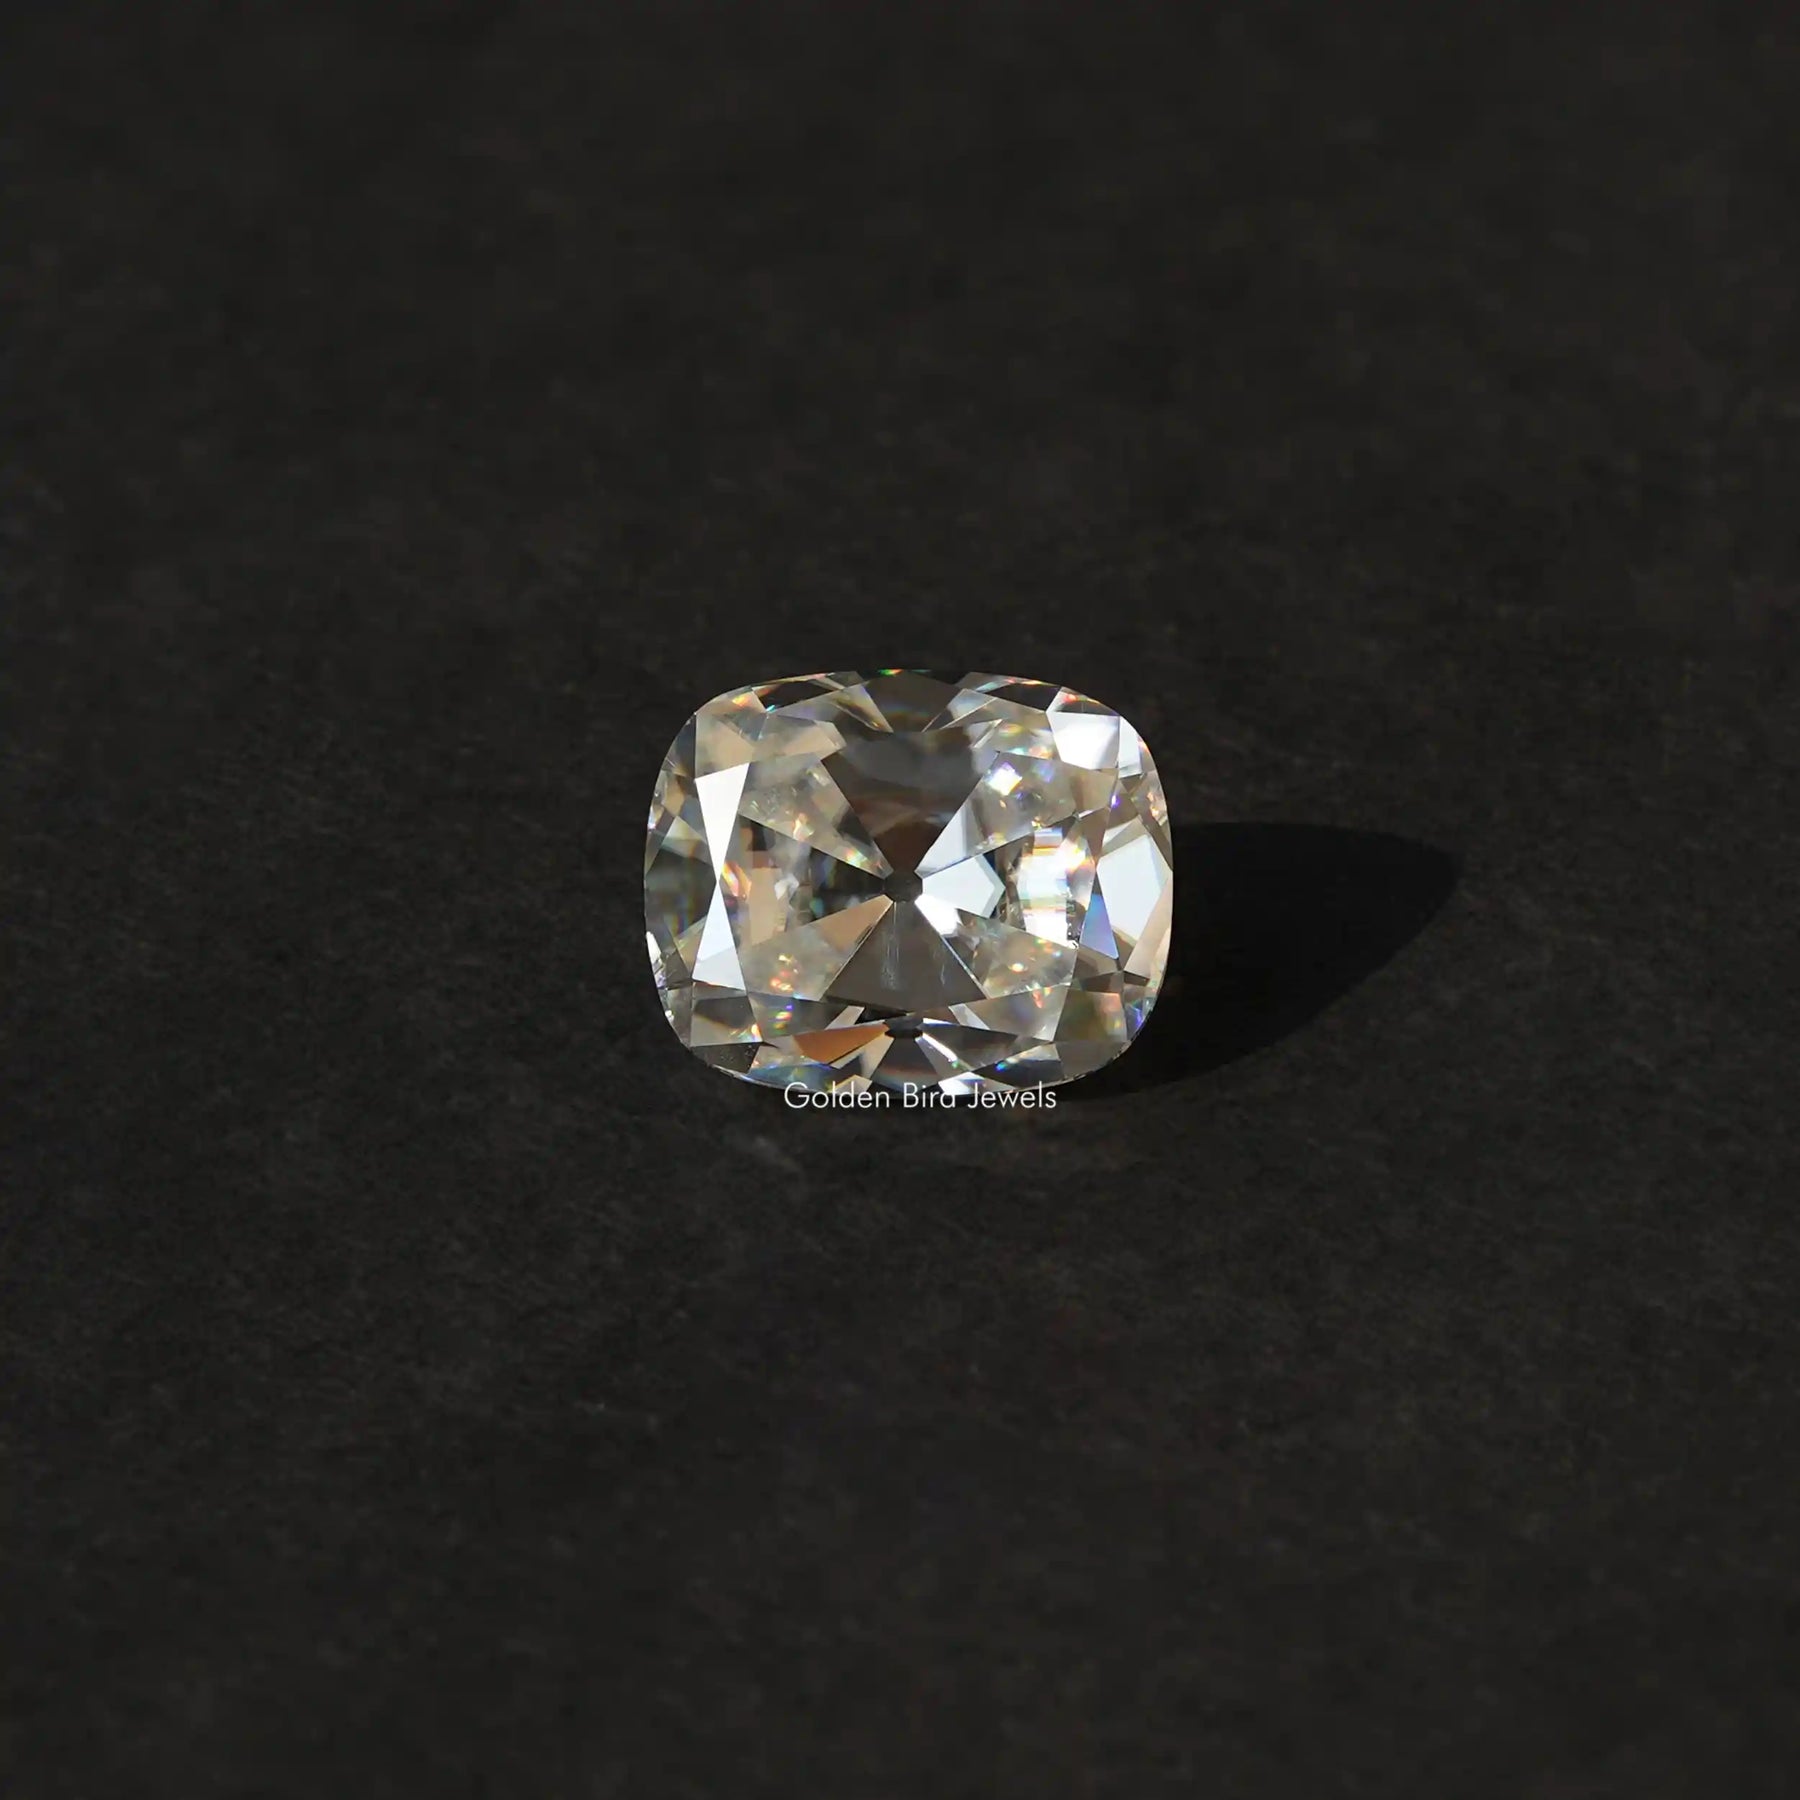 [Front view of colorless cushion cut loose moissanite stone]-[Golden Bird Jewels]